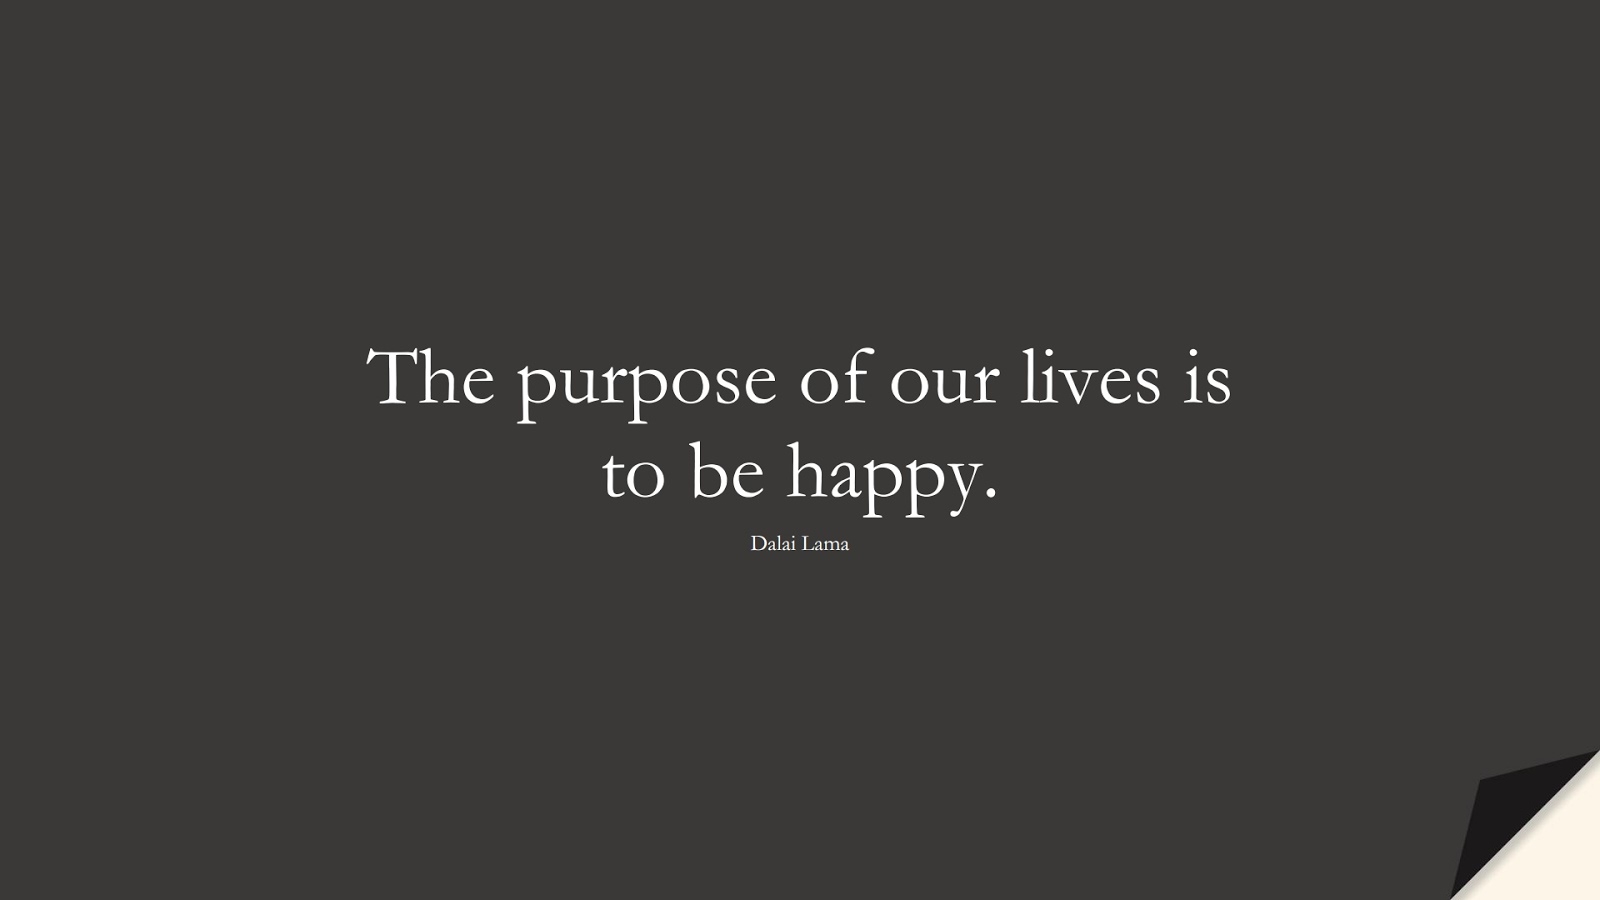 The purpose of our lives is to be happy. (Dalai Lama);  #LifeQuotes